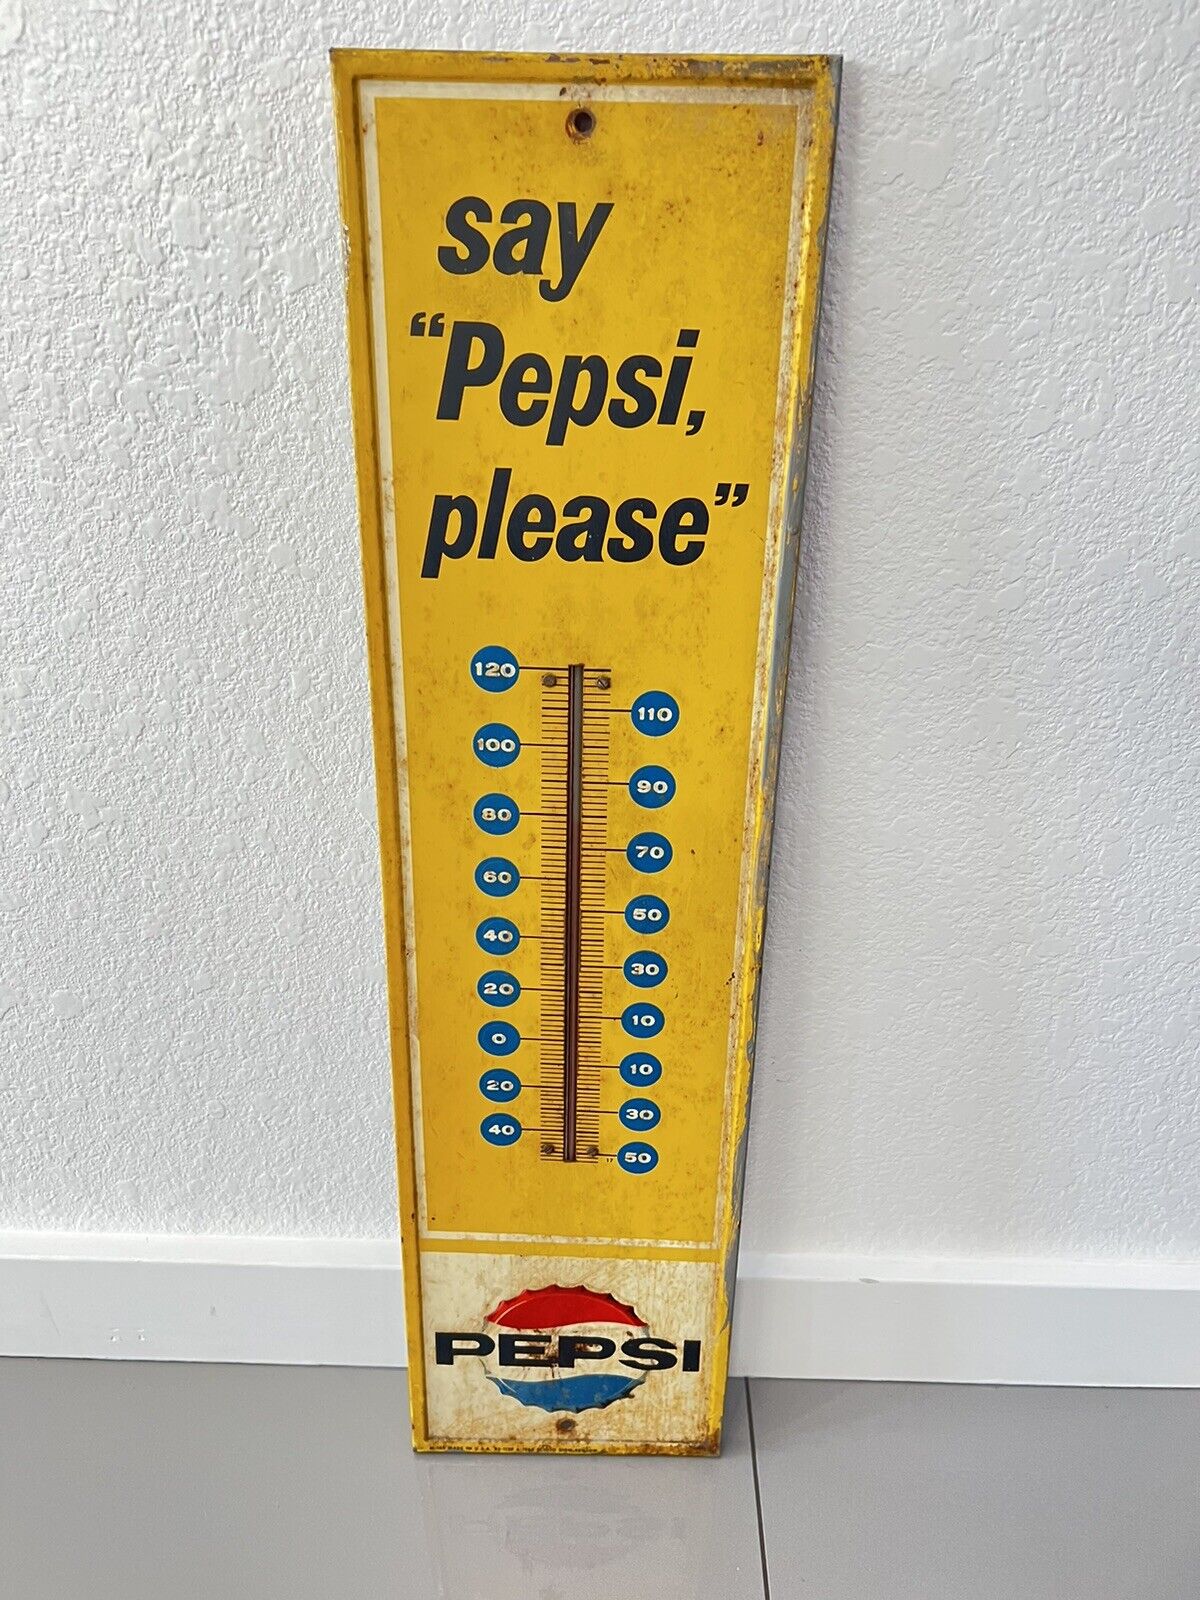 Vntg PEPSI-COLA THE LIGHT REFRESHMENT THERMOMETER Rare Old Advertising Sign 28”